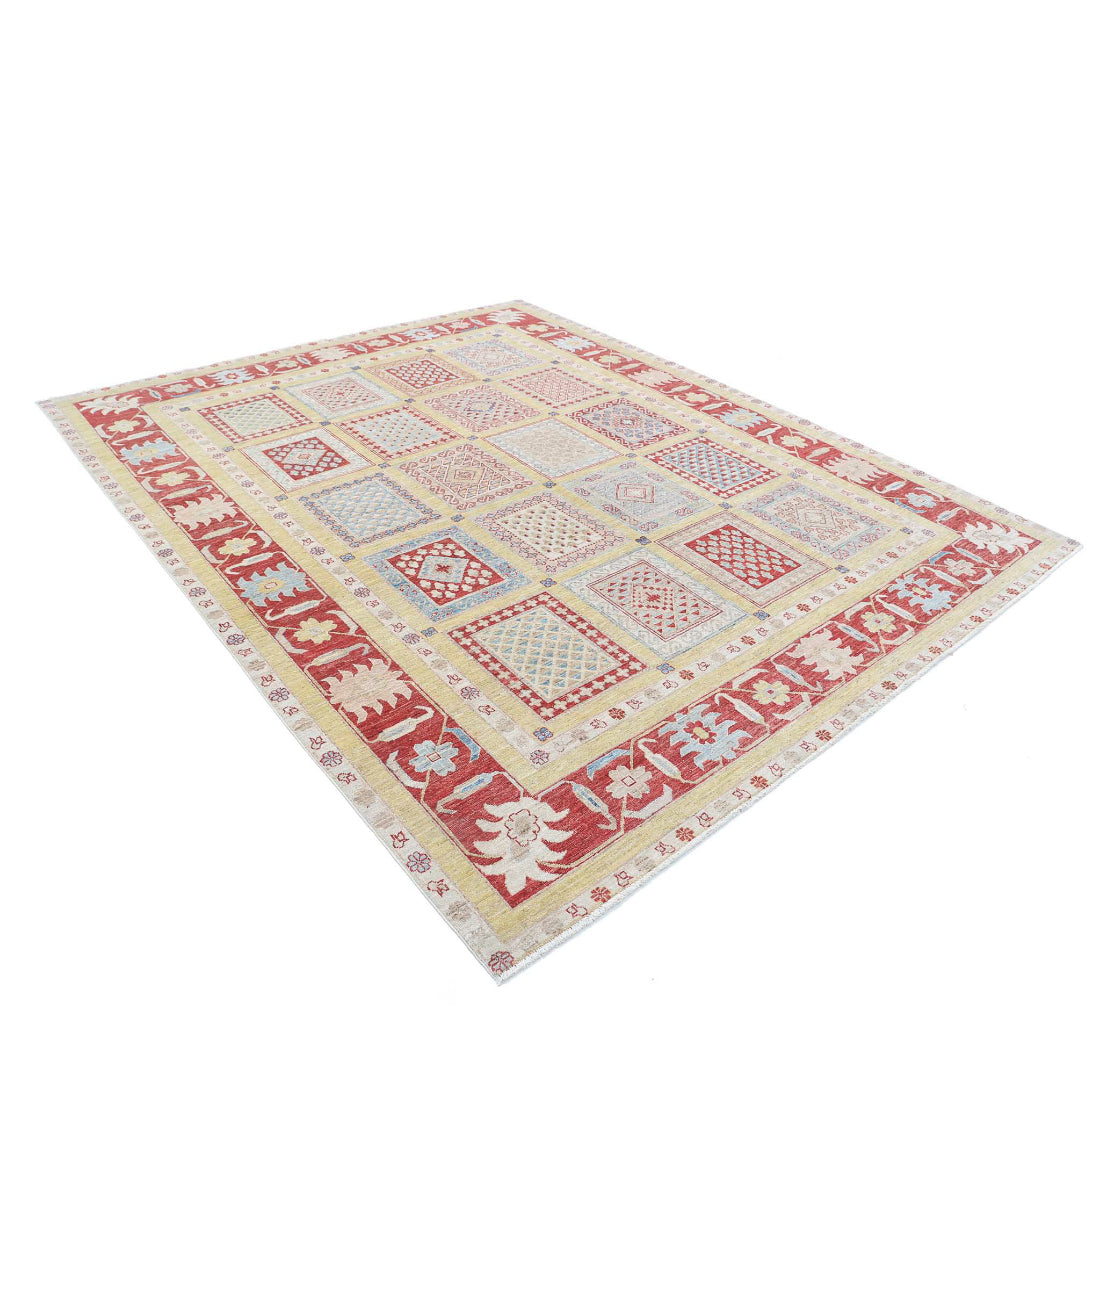 Hand Knotted Bakhtiari Wool Rug - 8'2'' x 10'0'' 8'2'' x 10'0'' (245 X 300) / Gold / Red